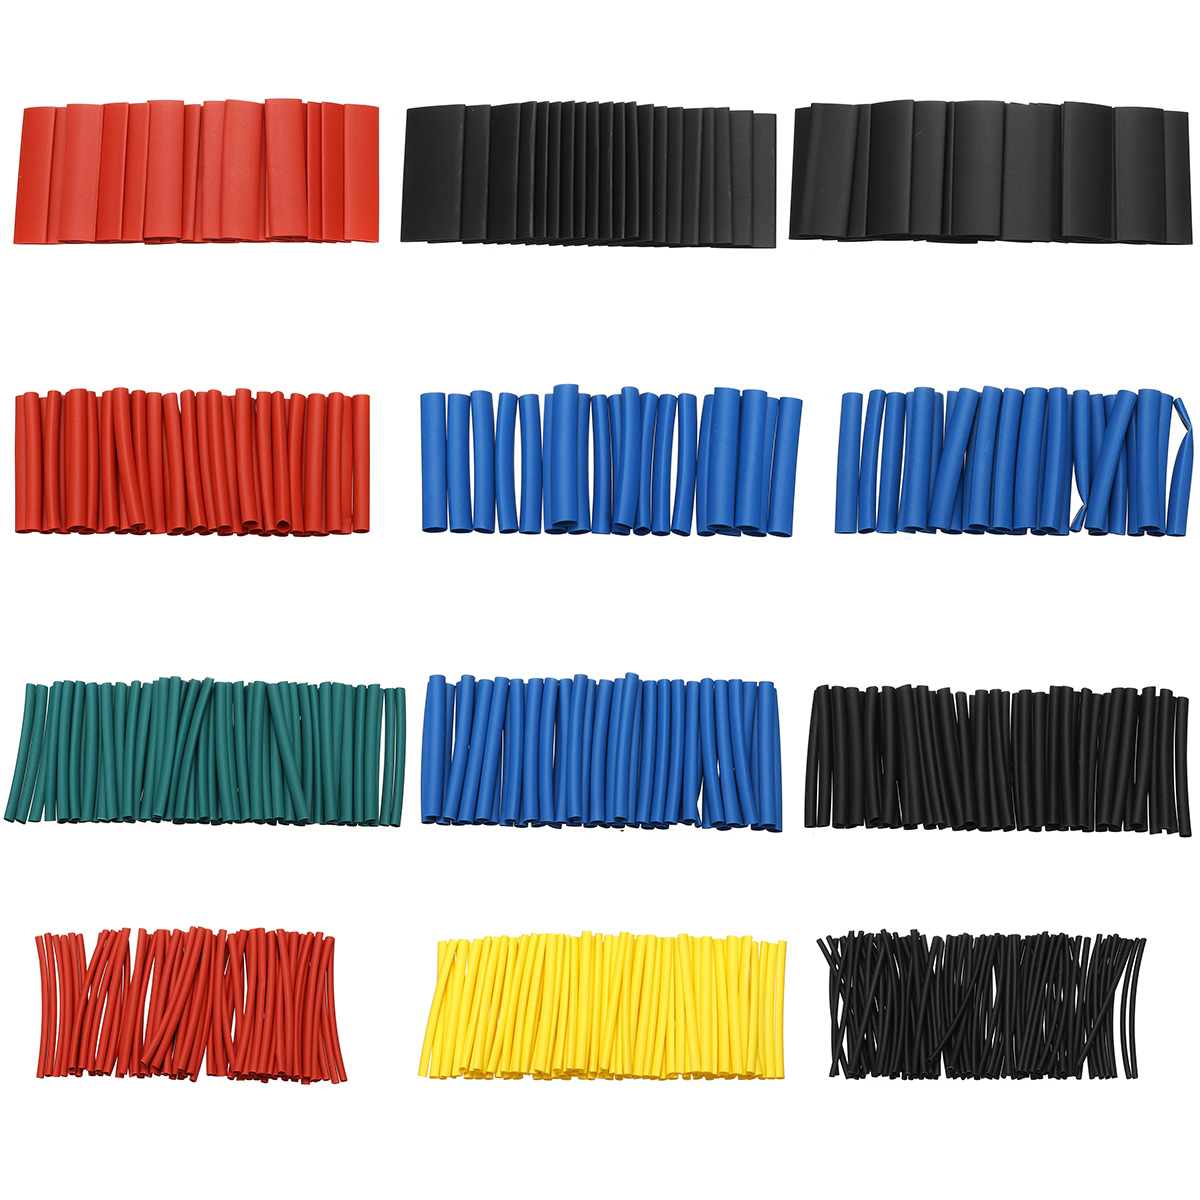 560Pcs-11-Sizes-Heat-Shrink-Tubing-Tube-Wire-Cable-Insulation-Sleeving-Kit-1365687-6